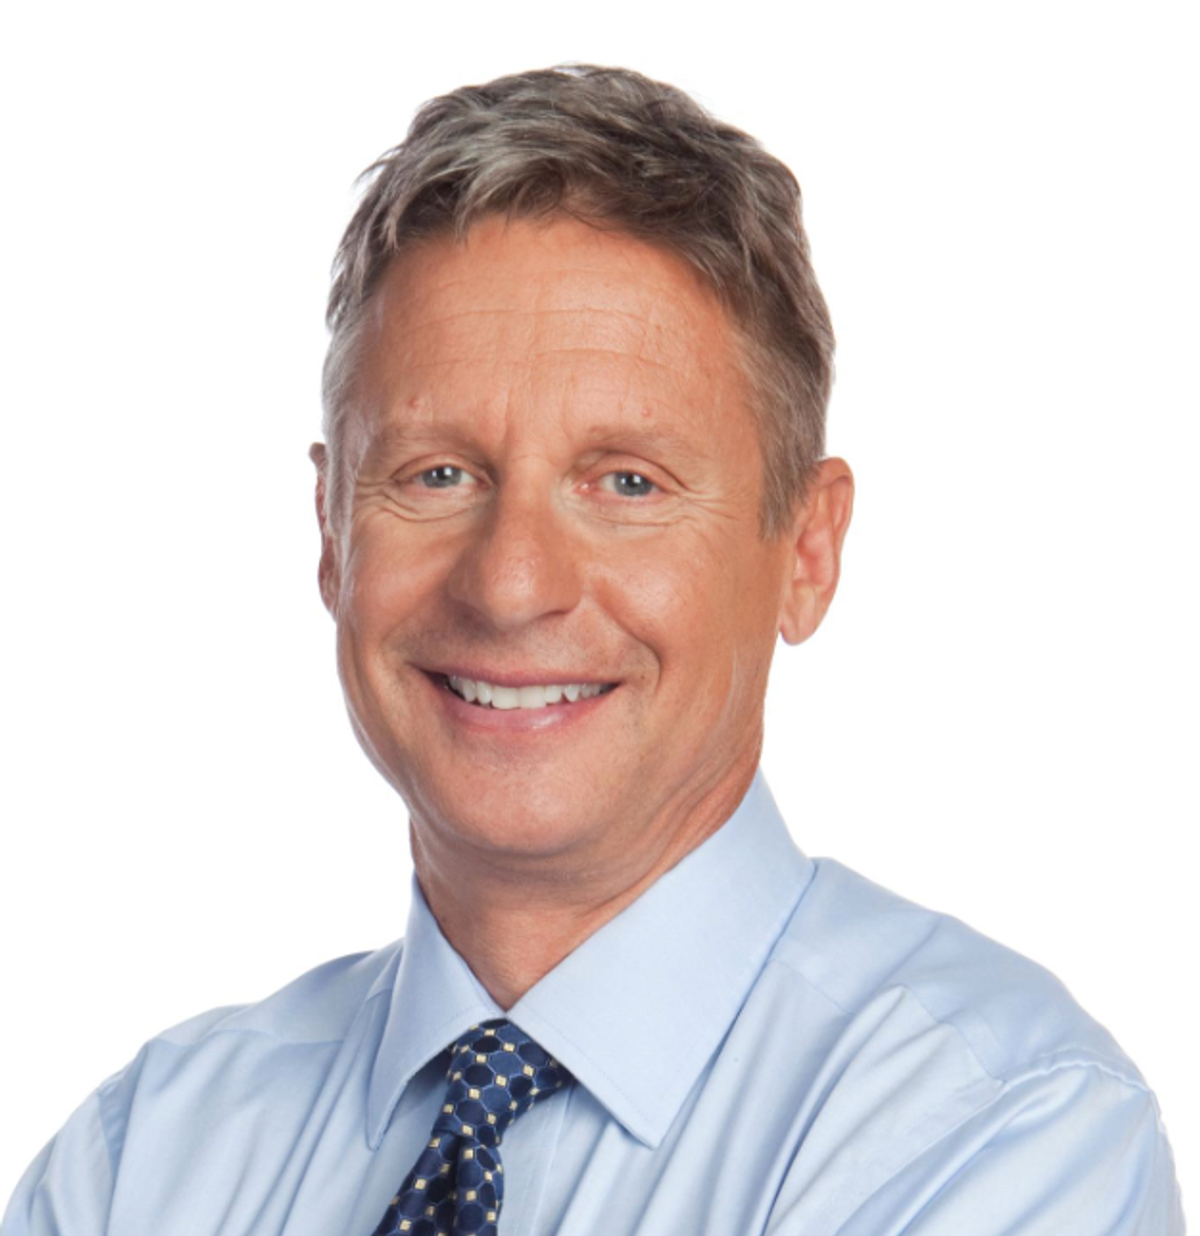 What We Need To Takeaway From Gary Johnson's "What Is Aleppo" Mishap